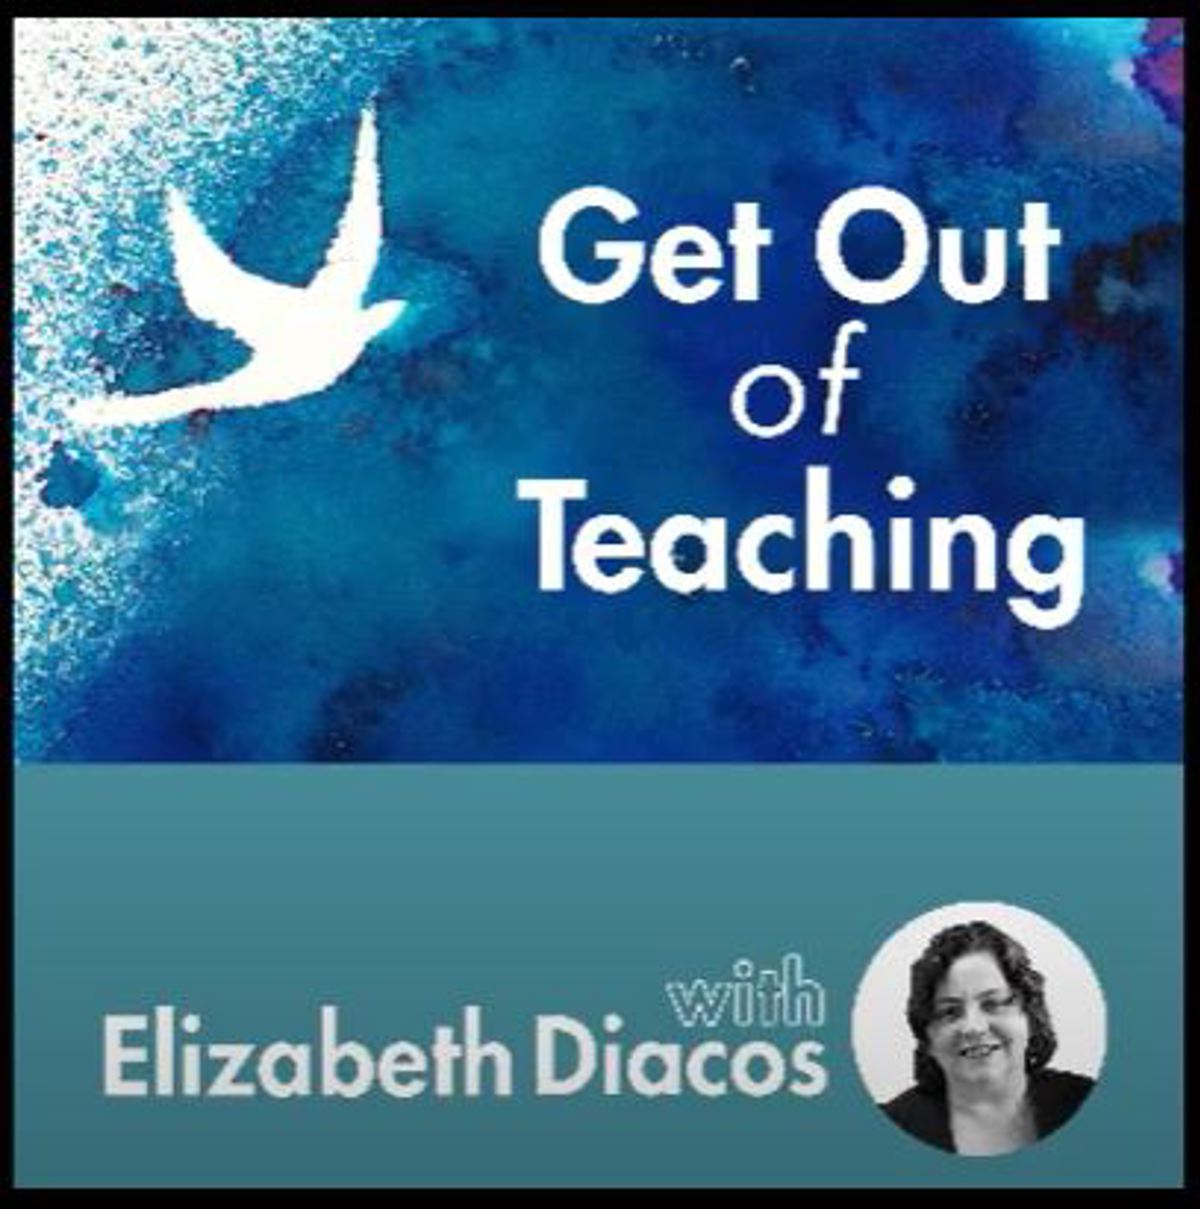 Get out of Teaching Podcast interview